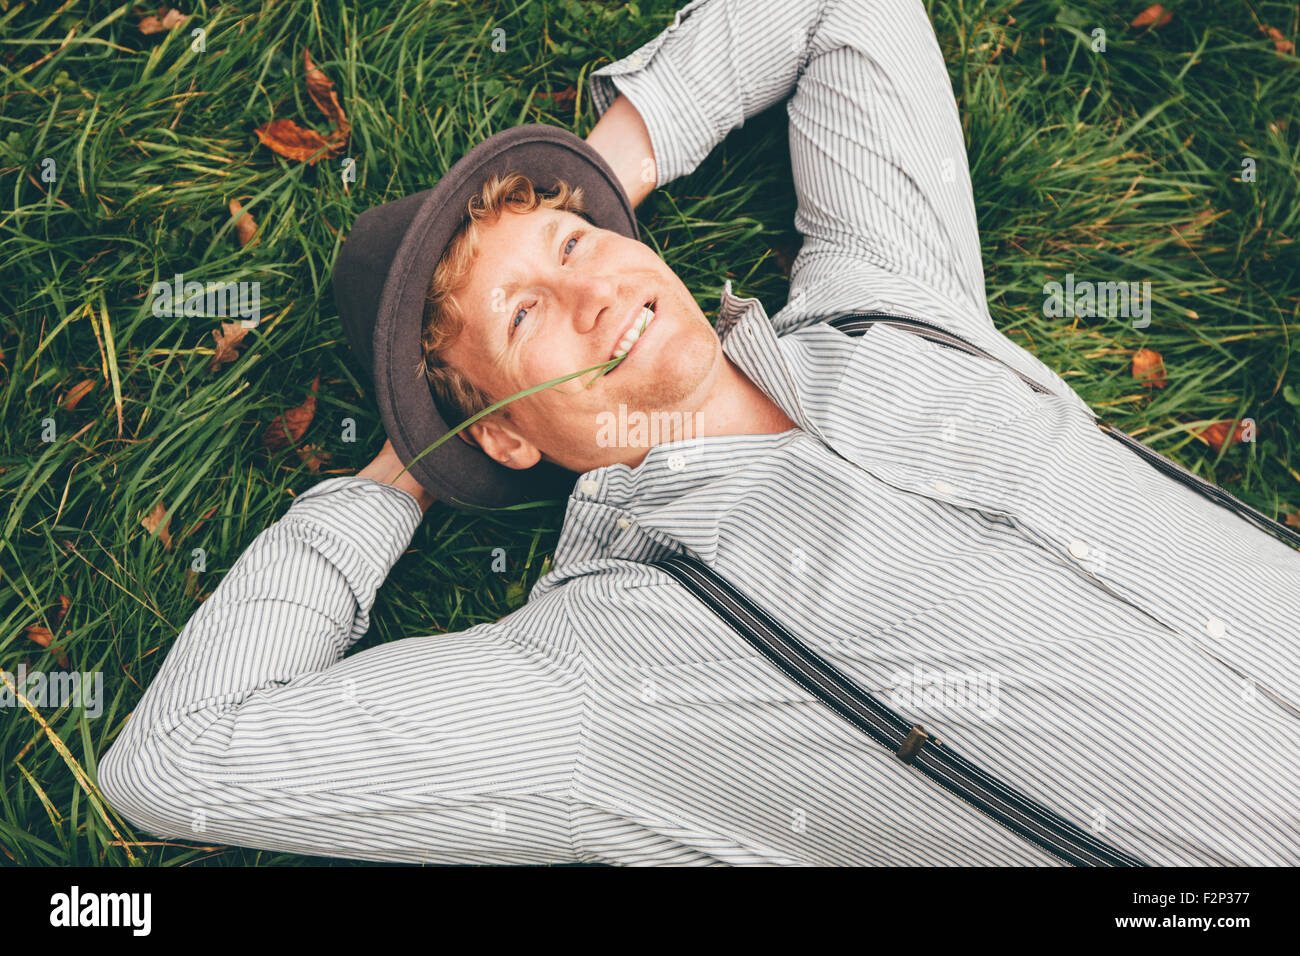 https://c8.alamy.com/comp/F2P377/portrait-of-smiling-young-man-lying-on-a-meadow-with-hands-behind-F2P377.jpg